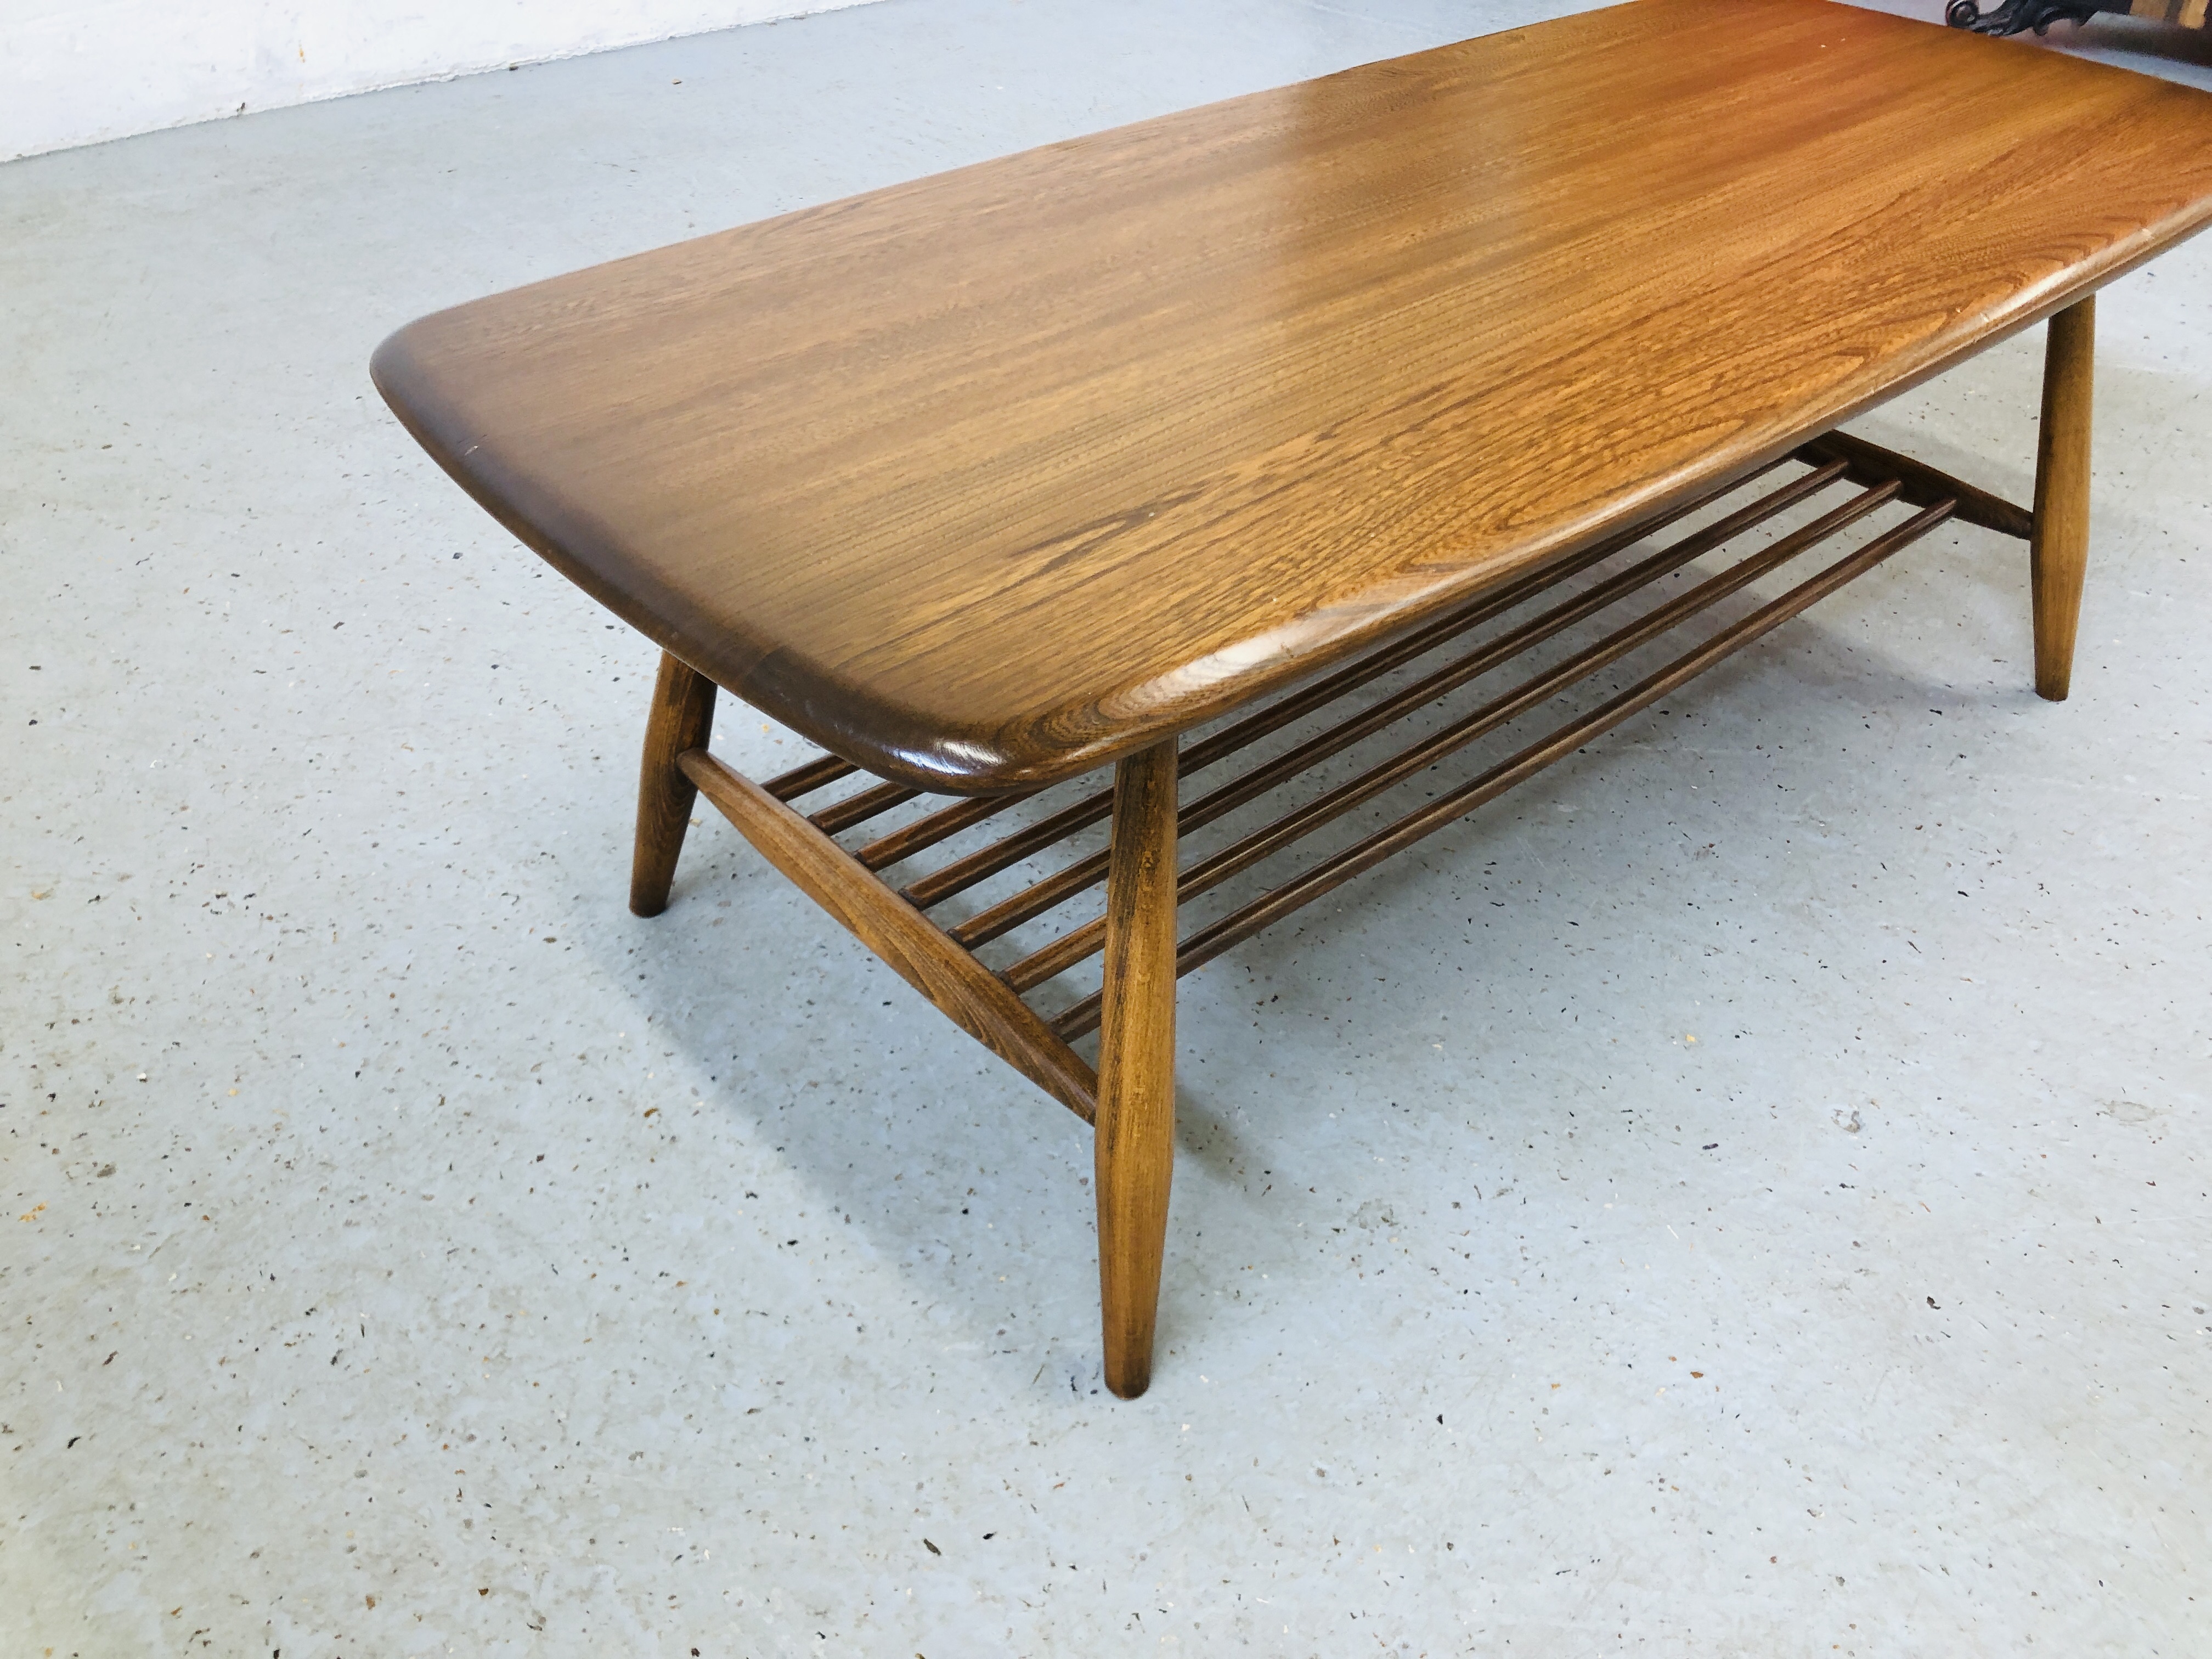 MID CENTURY ERCOL GOLDEN DAWN RECTANGLE COFFEE TABLE WITH SHELF BELOW L 105CM, D 46CM, H 36CM. - Image 5 of 6